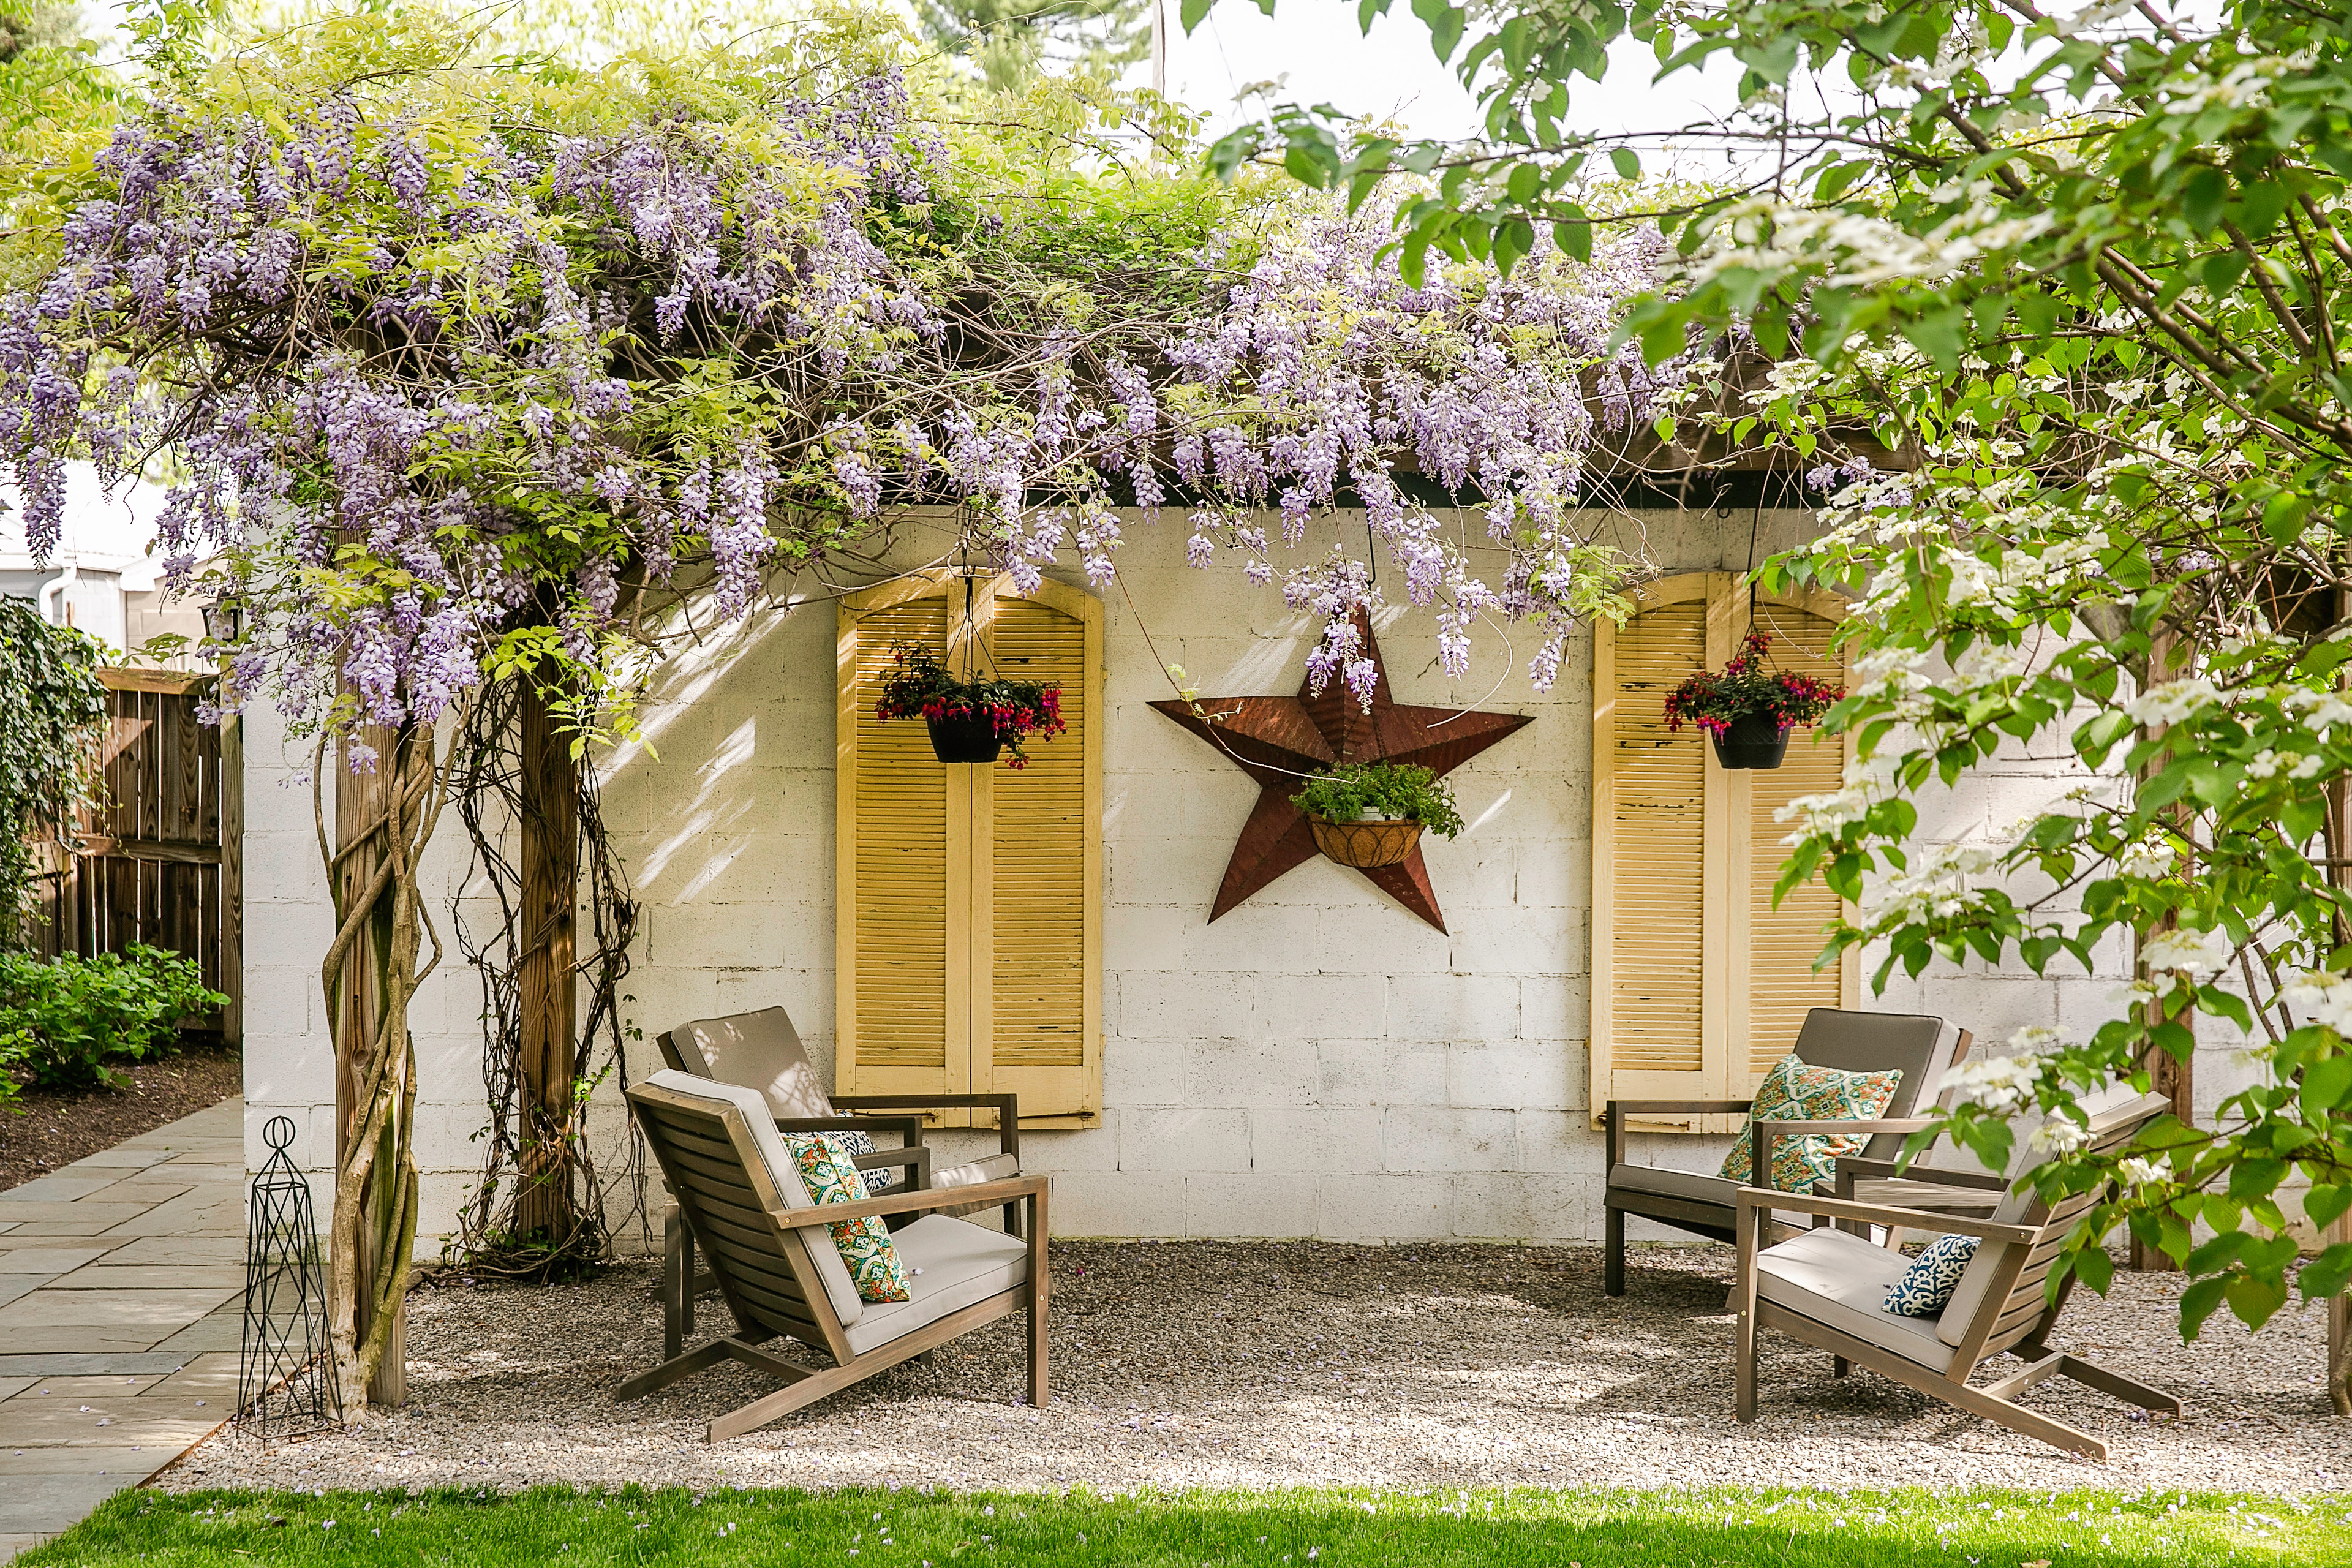 75 Shabby-Chic Style Patio with a Pergola Ideas You'll Love - May, 2022 |  Houzz